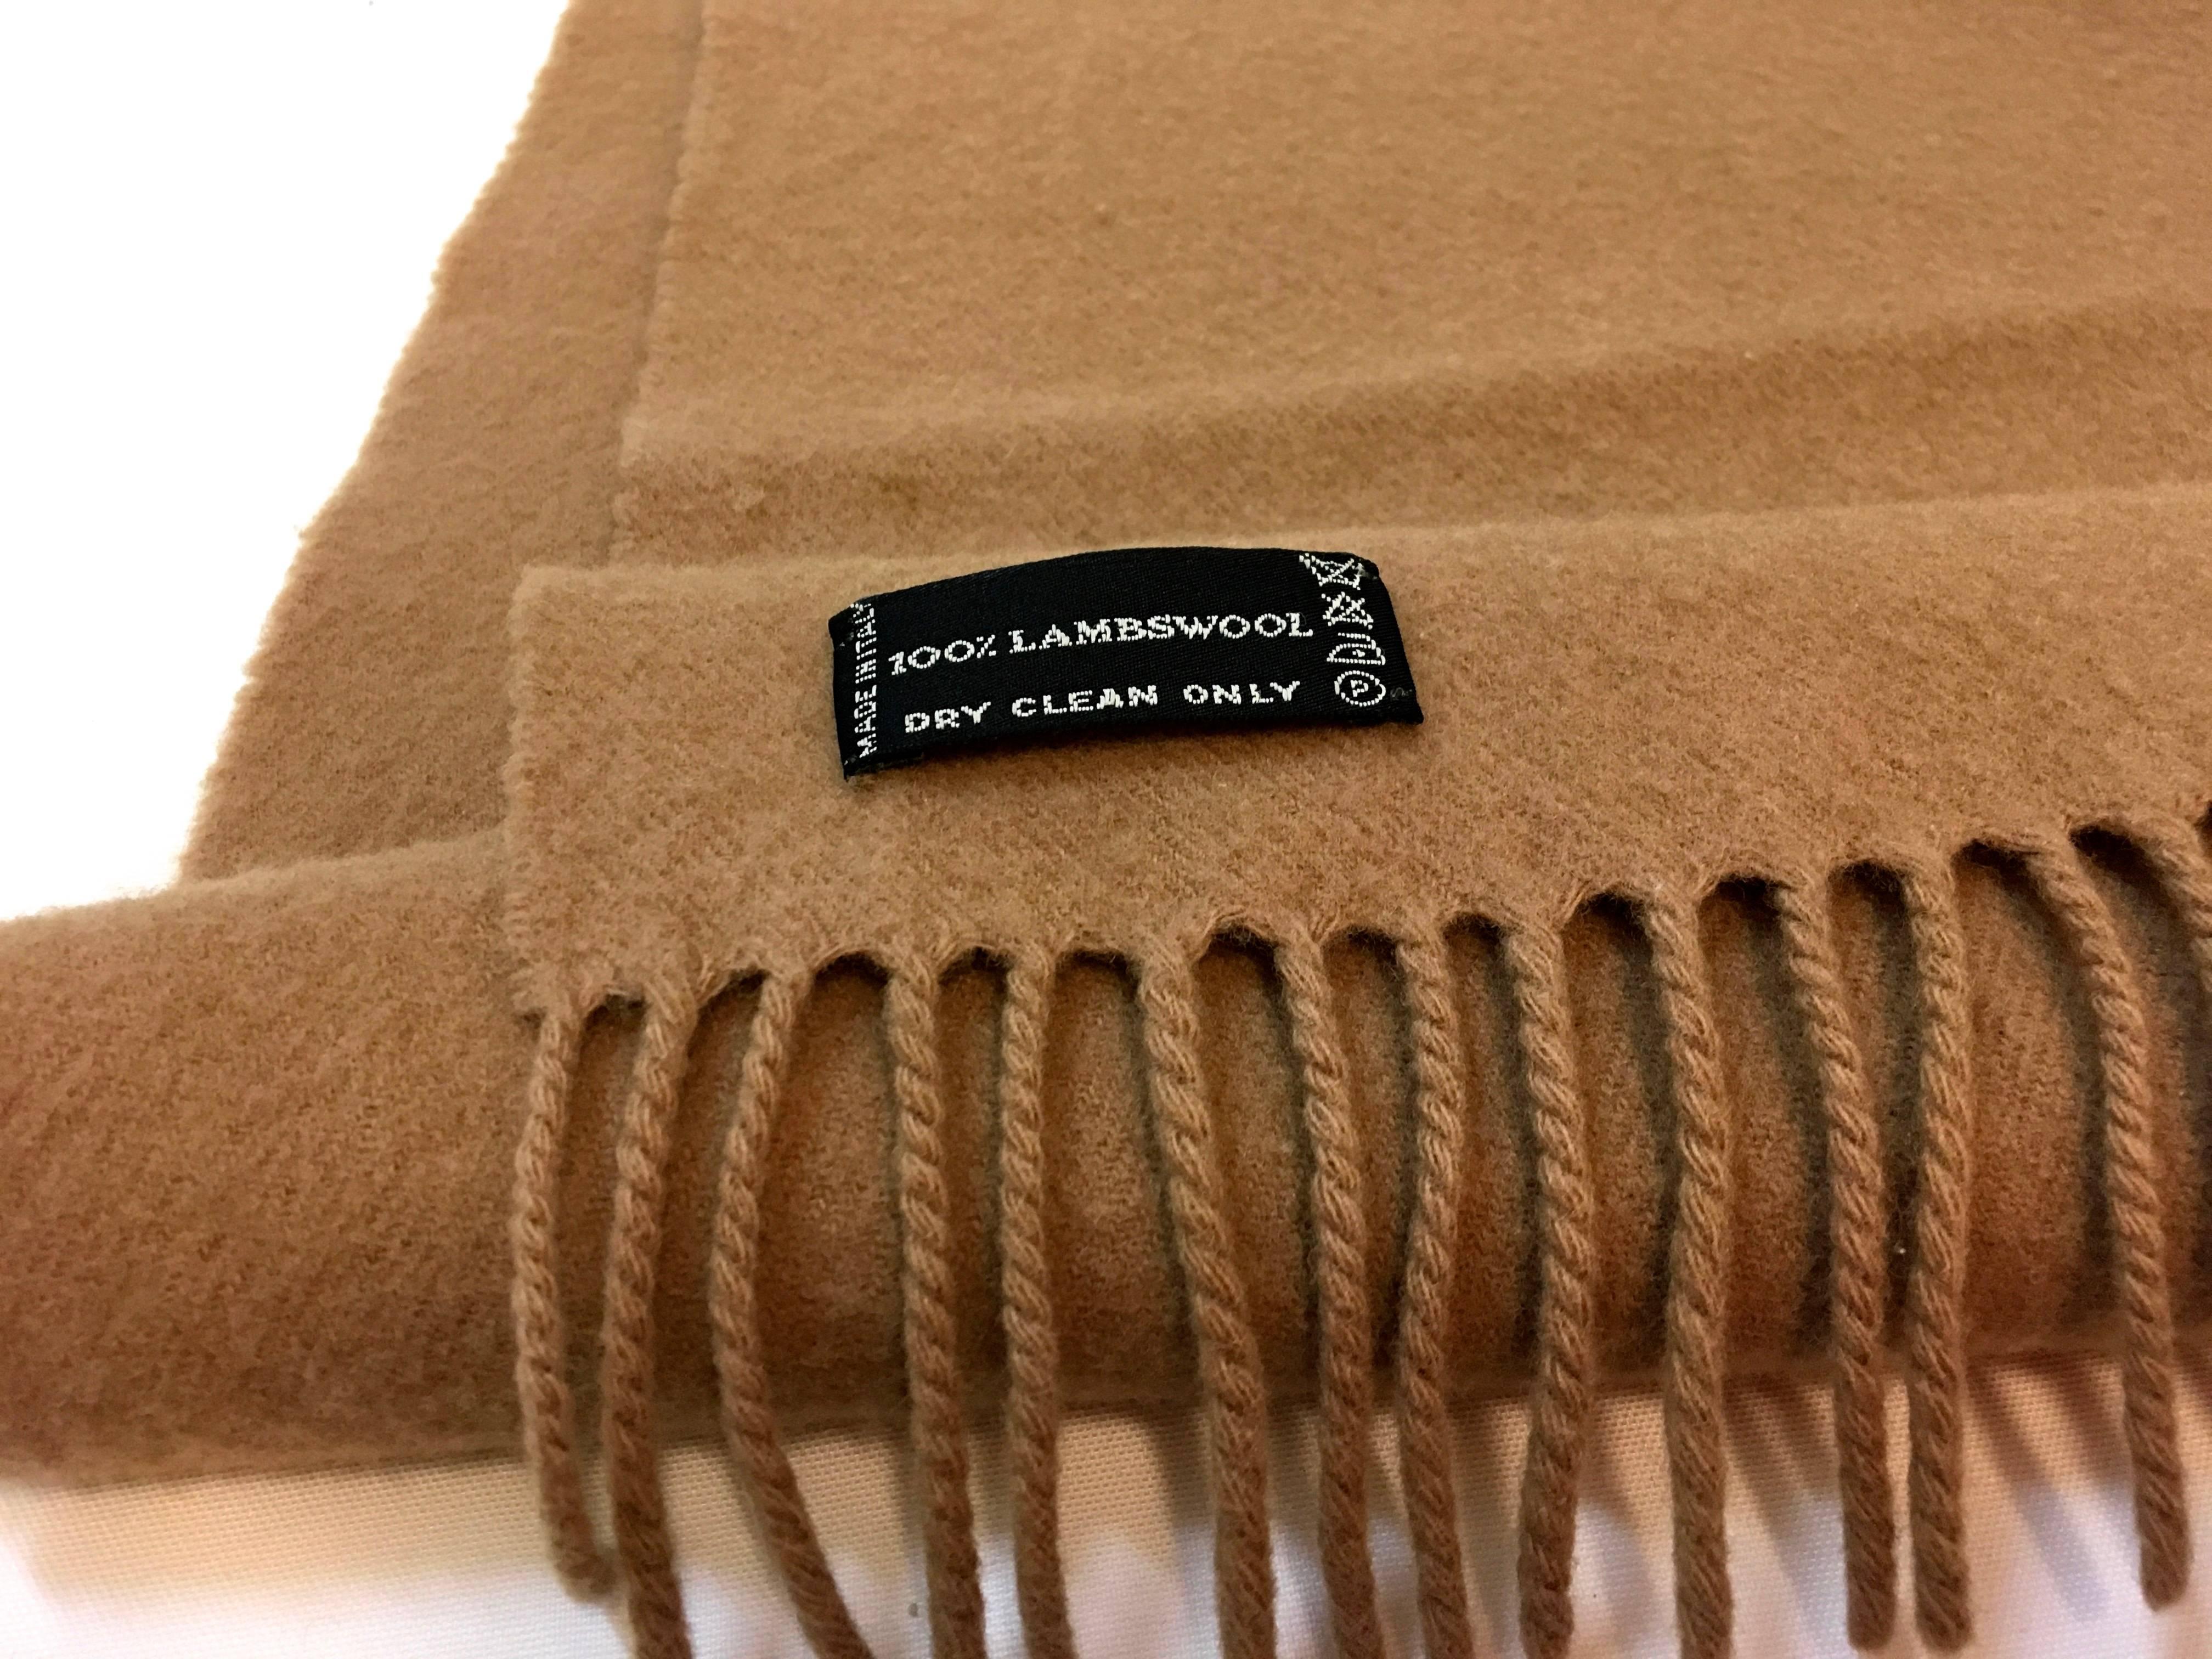 Presented here is a 1980's Courreges wool scarf. The scarf is brown and is embroidered with the iconic Courreges signature on the end of the scarf. The scarf is in very good condition with little signs of wear. Please see photographs. A good color